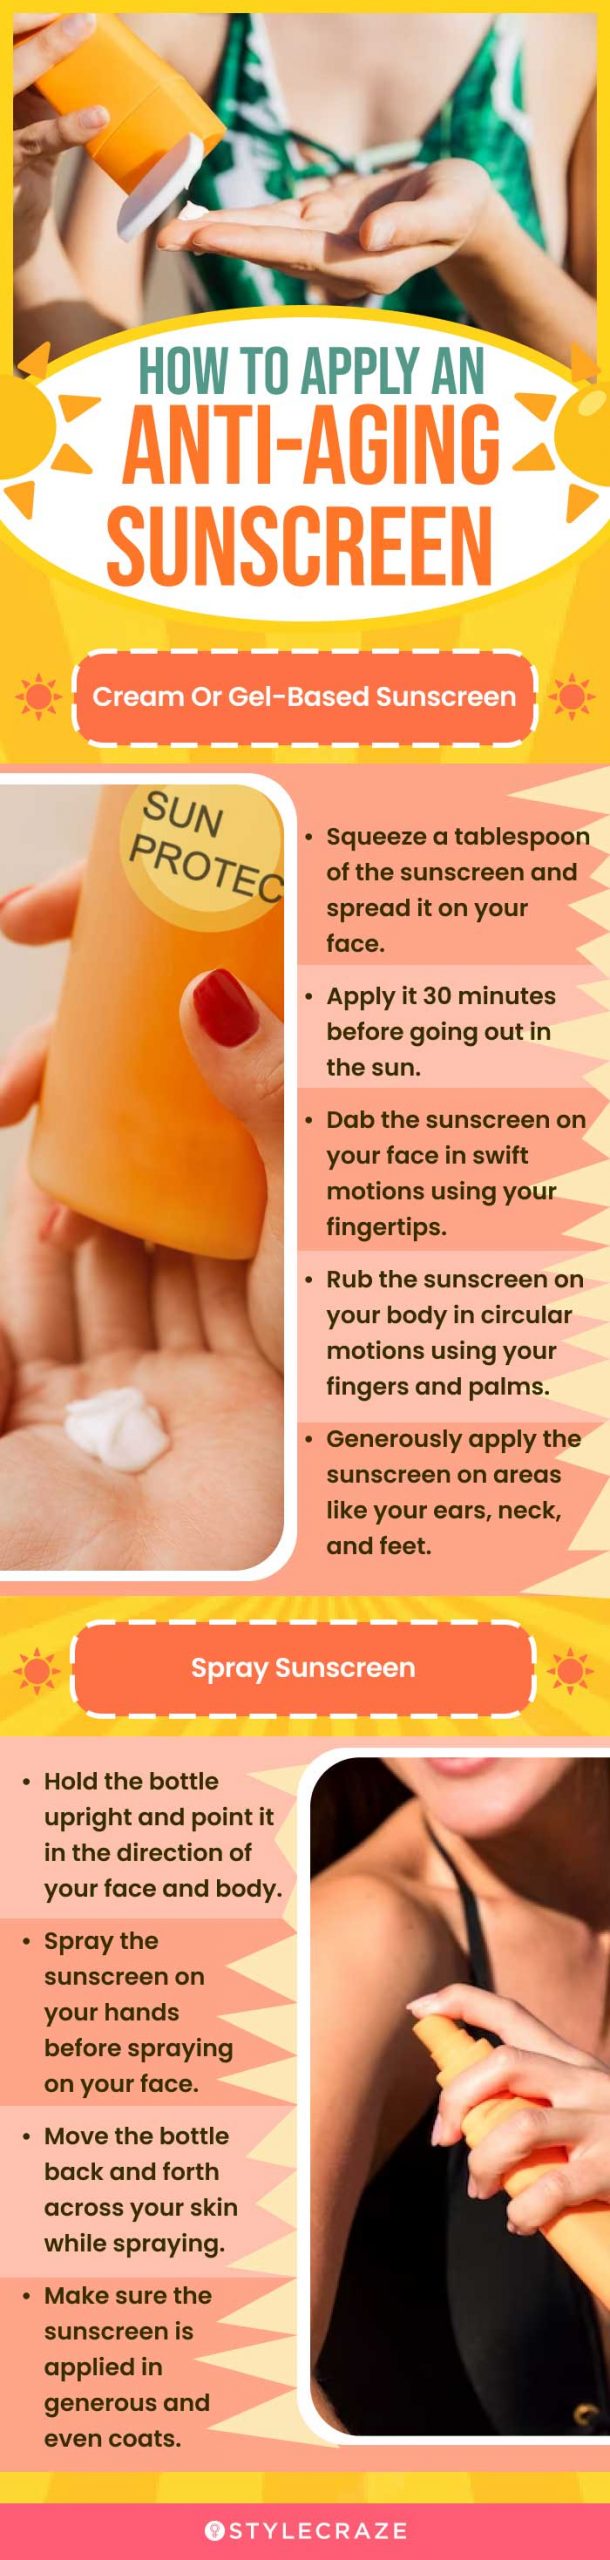 How To Apply An Anti-Aging Sunscreen (infographic)